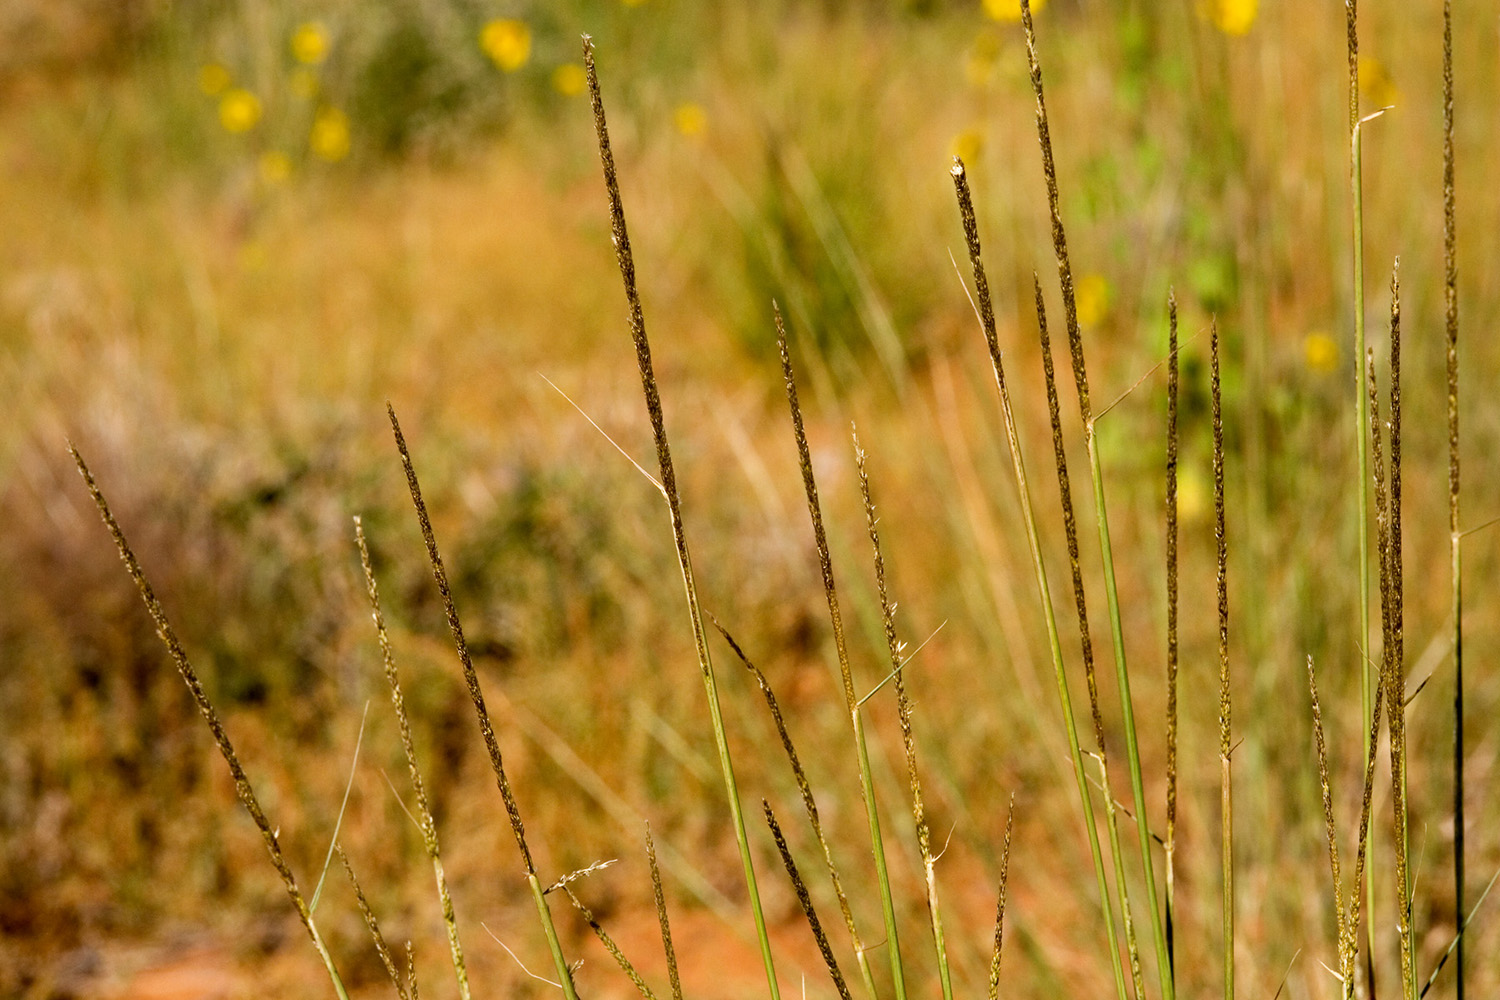 Thin, elongated seed spikes